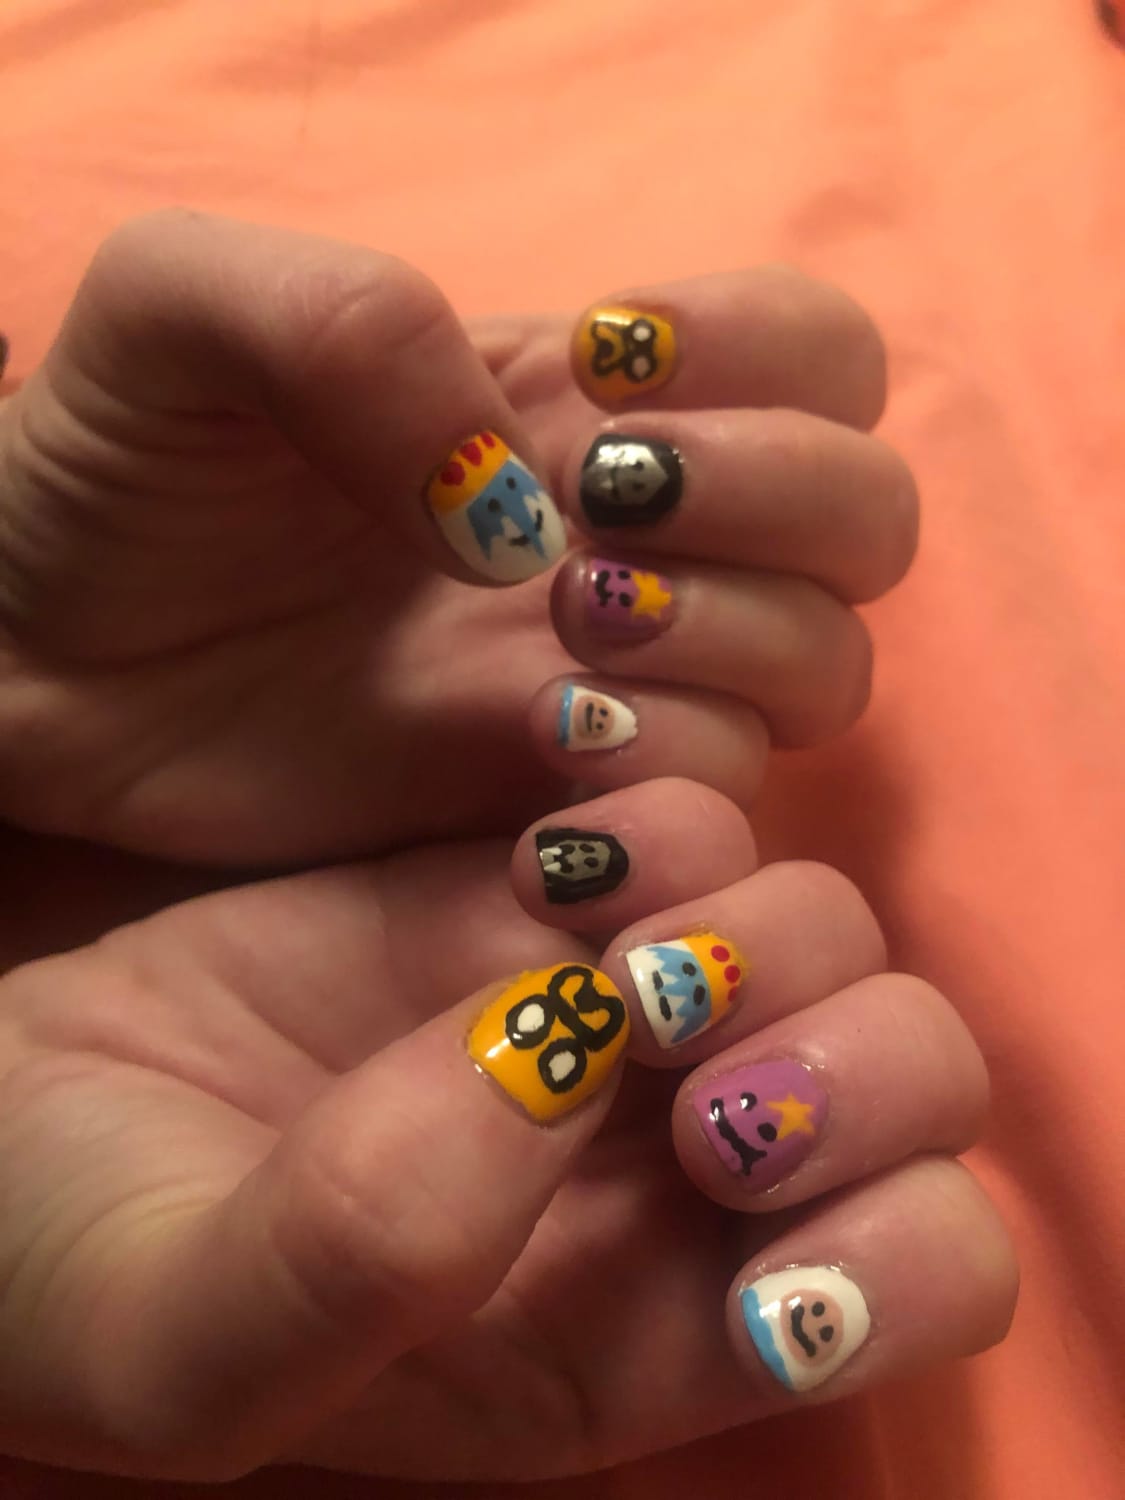 Adventure Time themed nail art that I did on my nails! It’s one of my first attempts at nail art and I’m pretty happy with how it turned out.